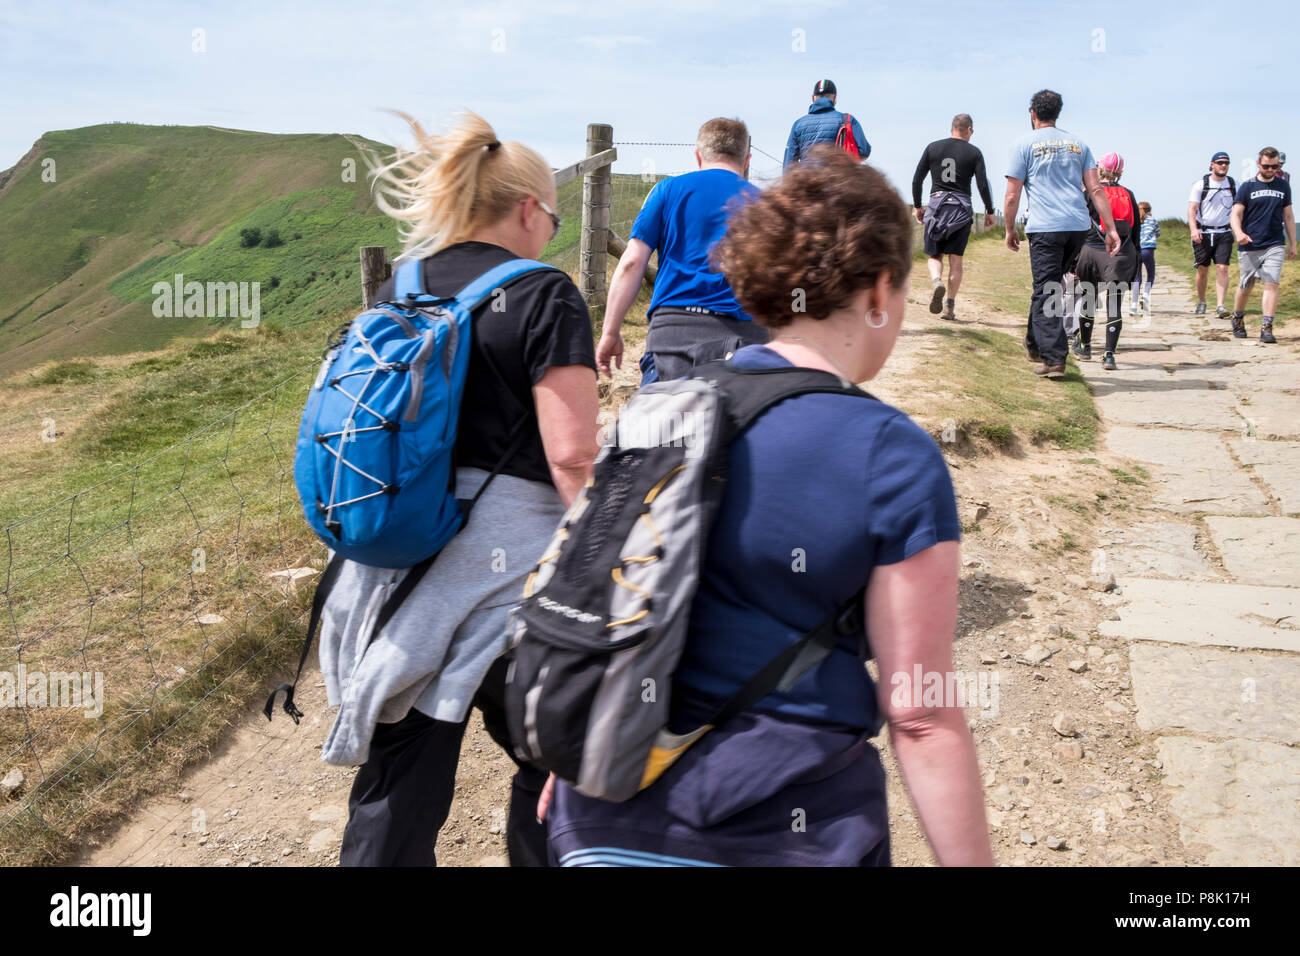 Lots of people on a day out walking in the countryside and heading towards Mam Tor on The Great Ridge, Derbyshire, Peak District, England, UK Stock Photo